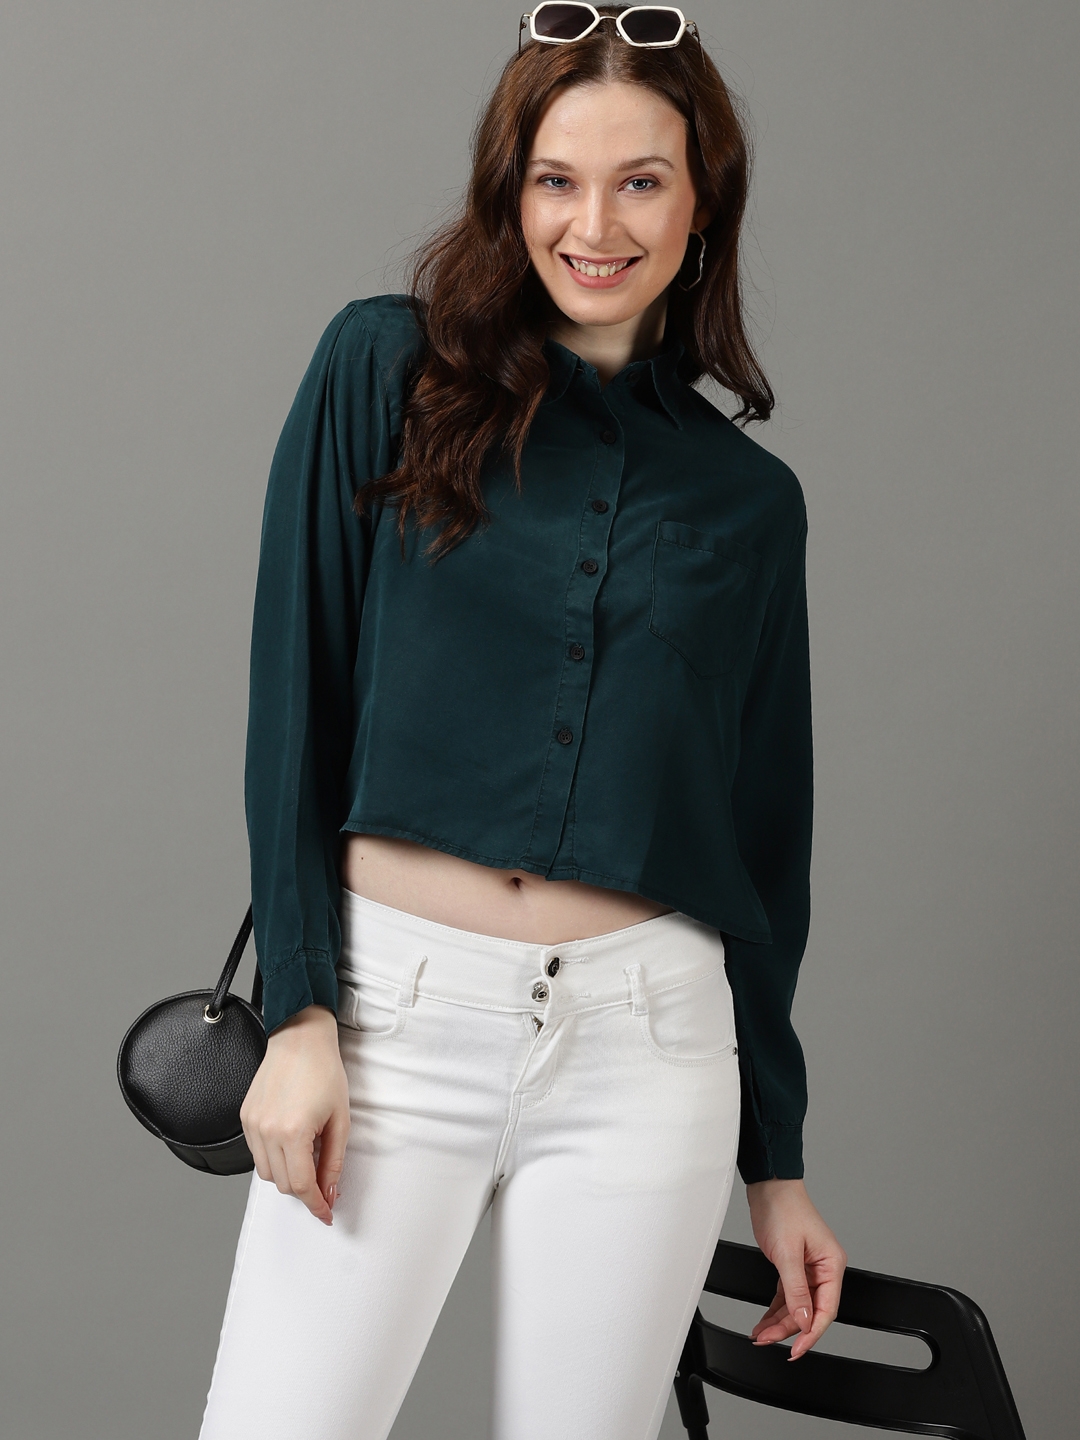 SHOWOFF Women's Spread Collar Solid Long Sleeves Teal Shirt